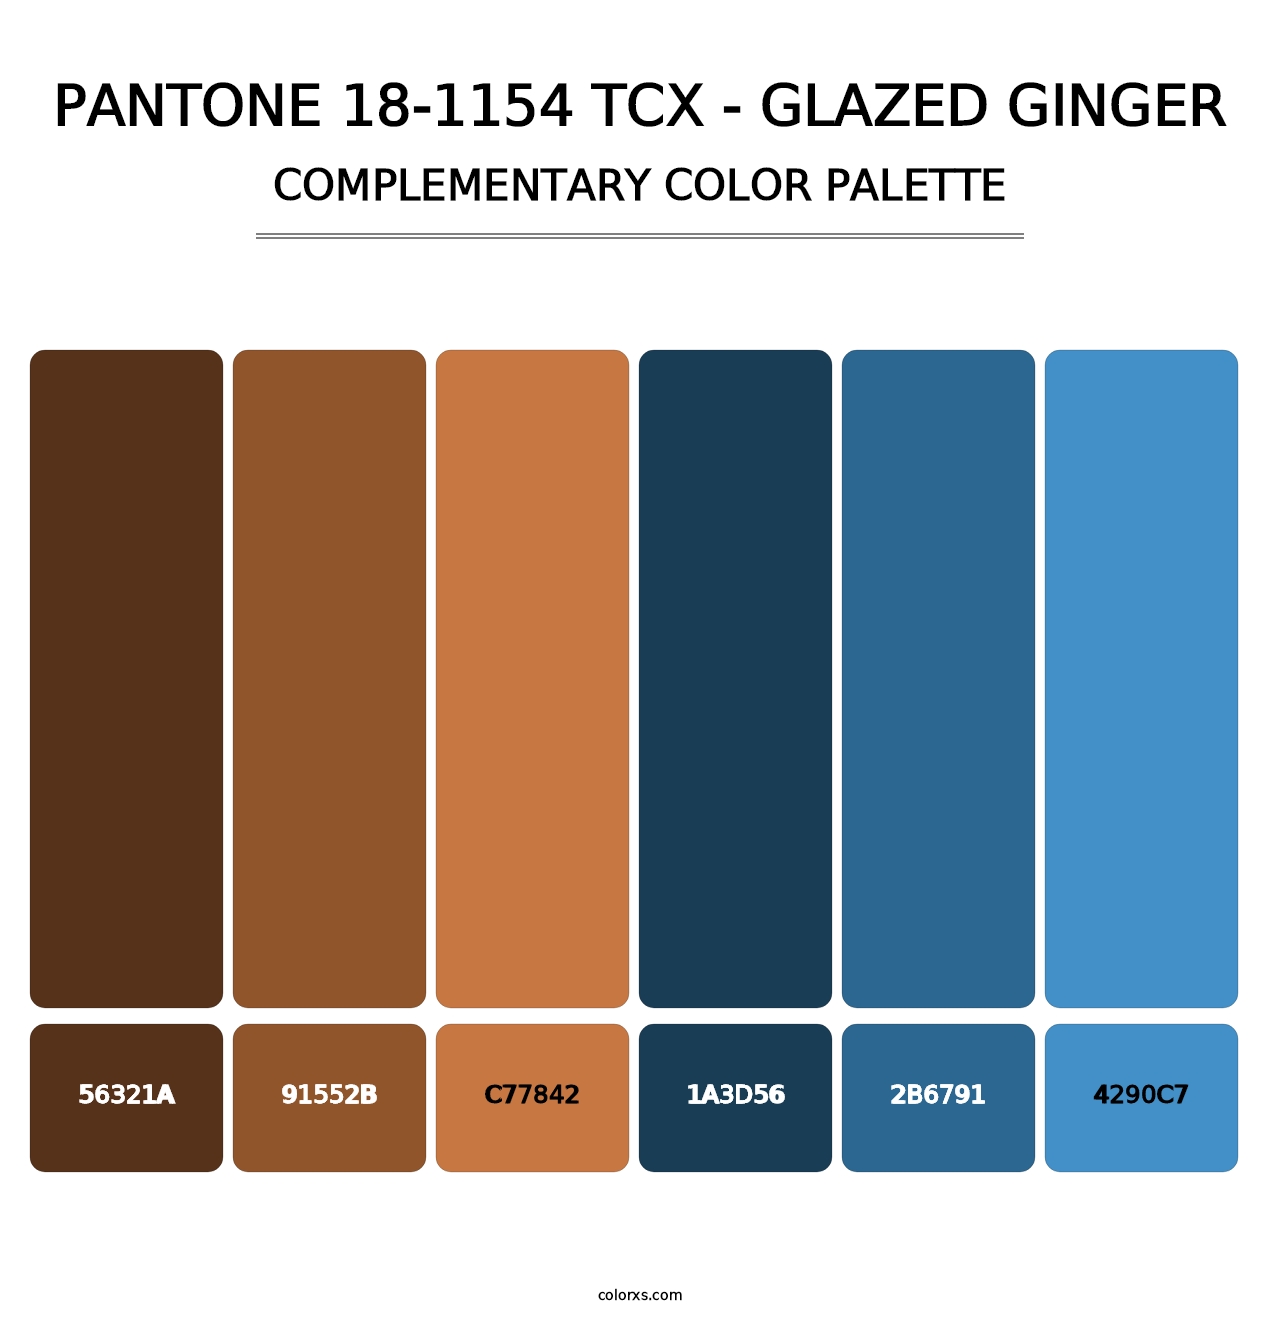 PANTONE 18-1154 TCX - Glazed Ginger - Complementary Color Palette